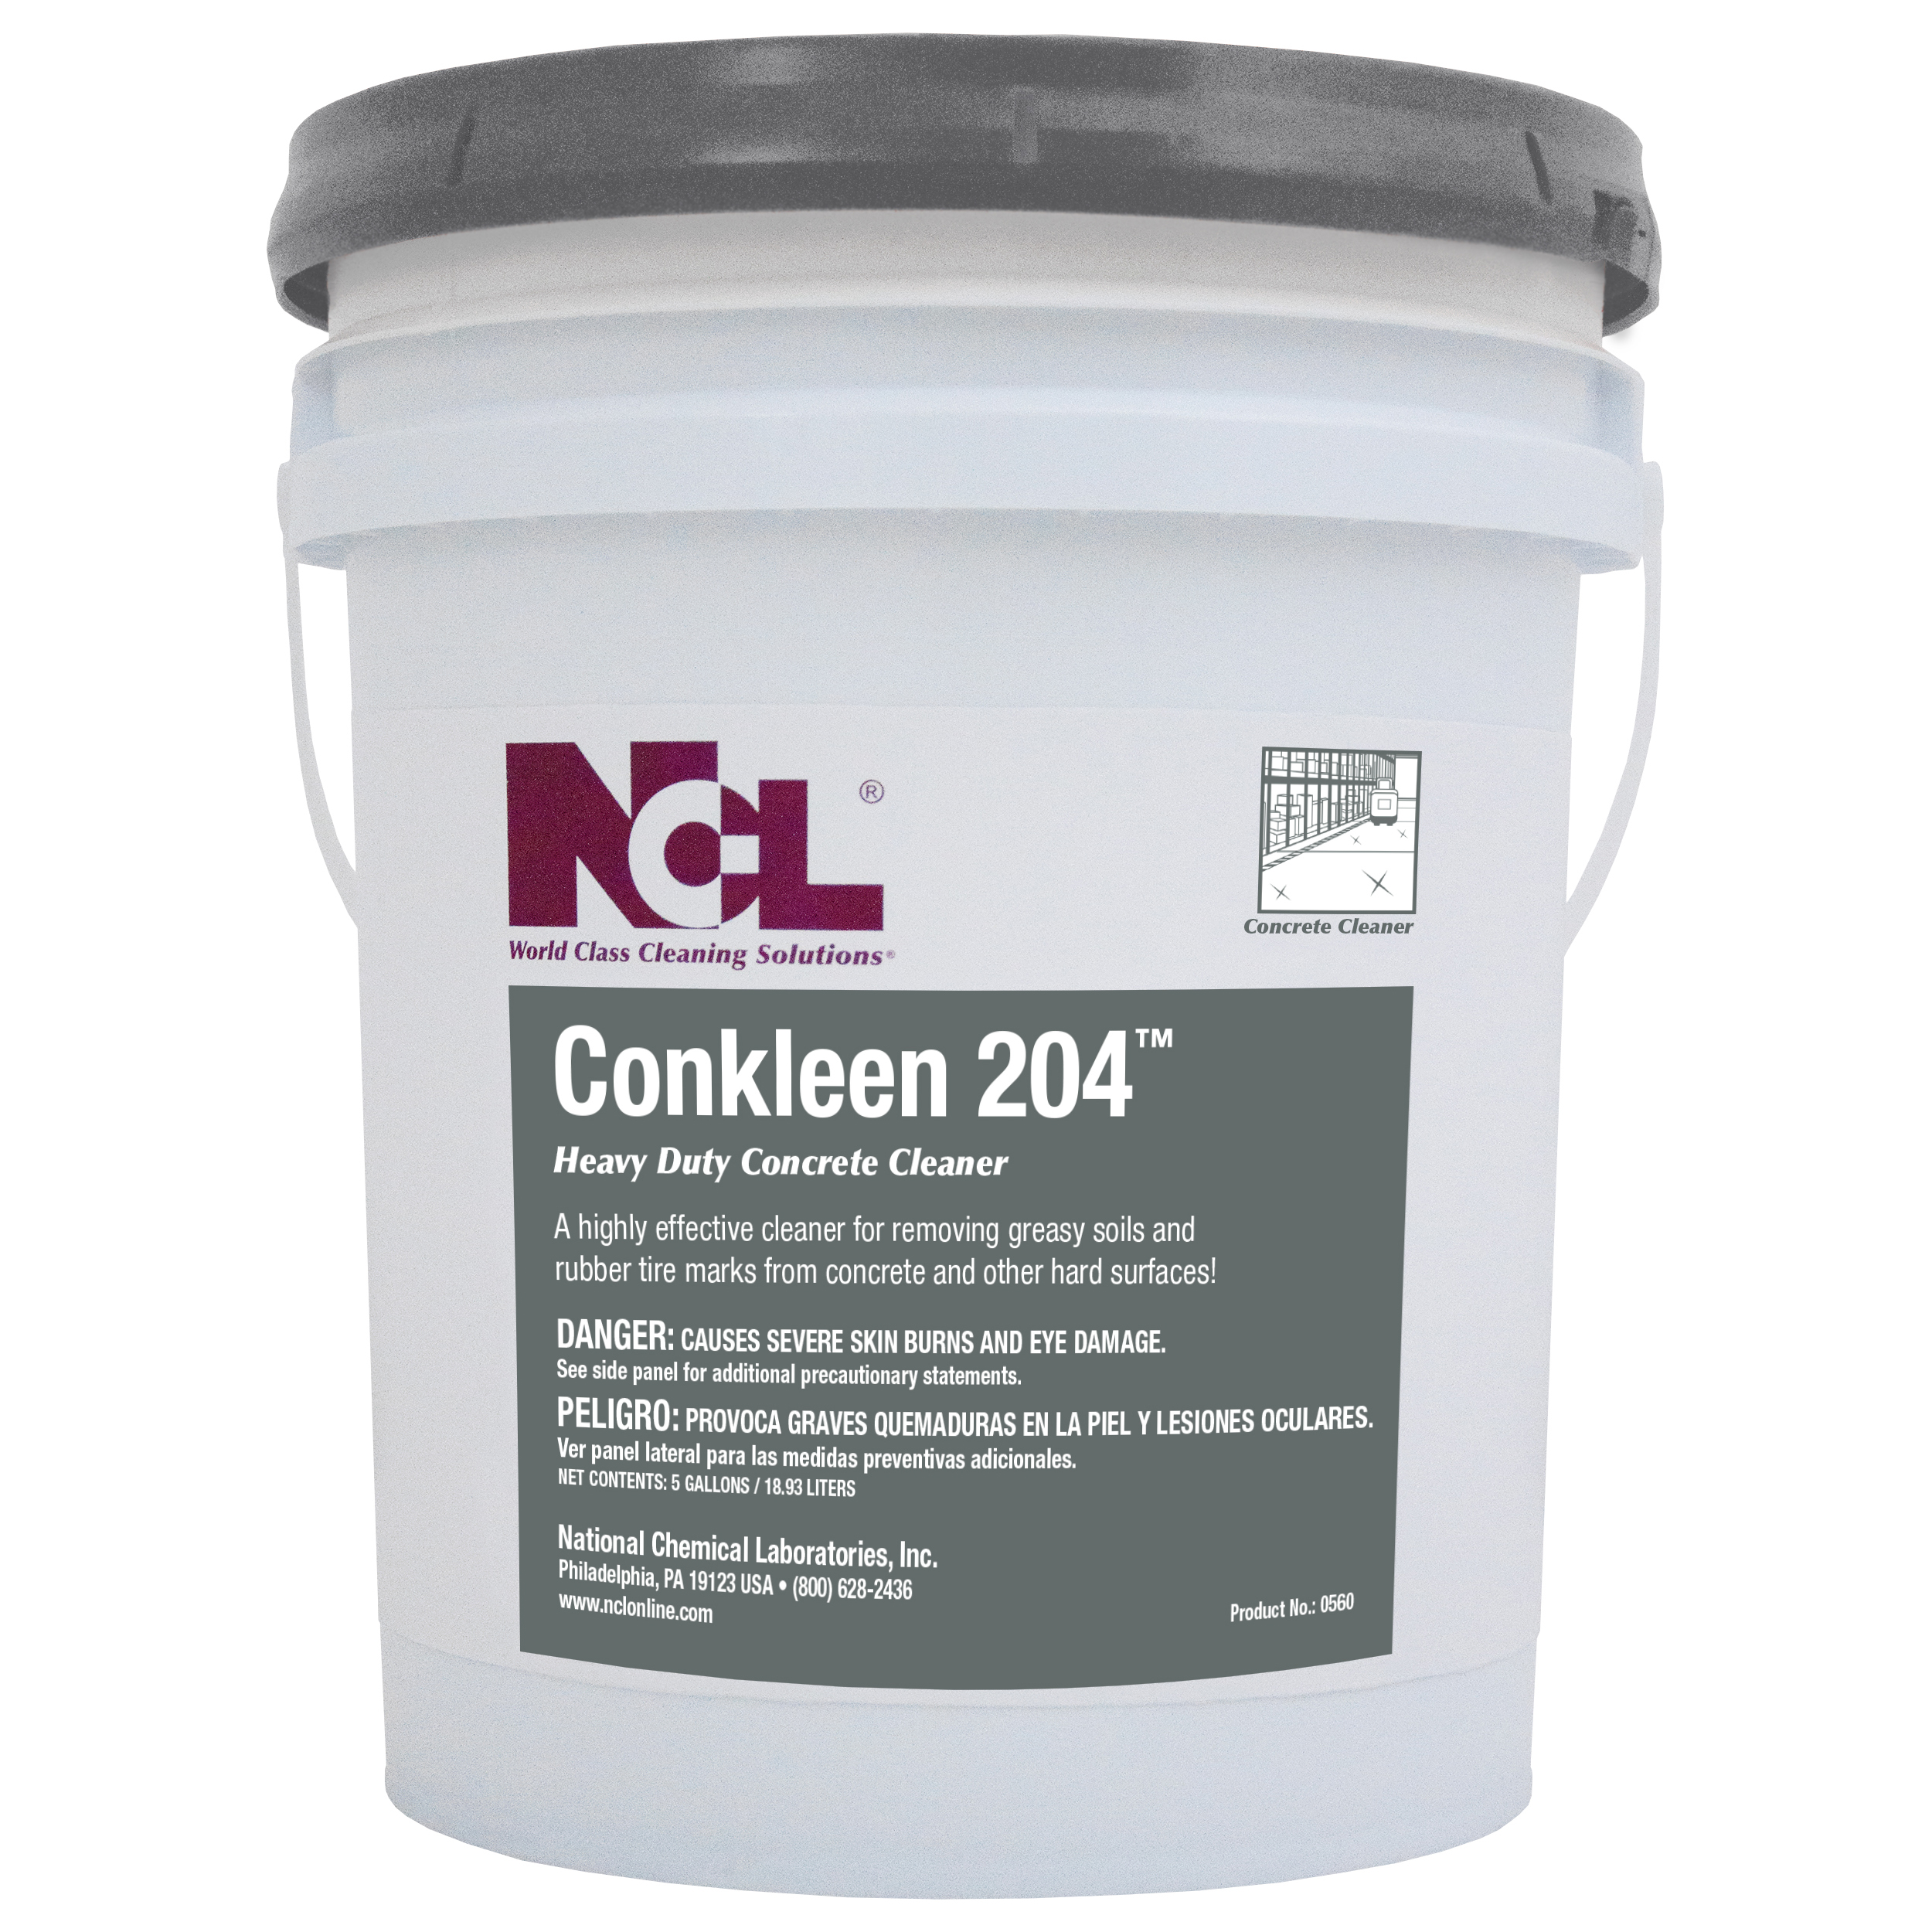  CONKLEEN 204 Heavy Duty Concrete Cleaner 5 Gal. Pail (NCL0560-20) 